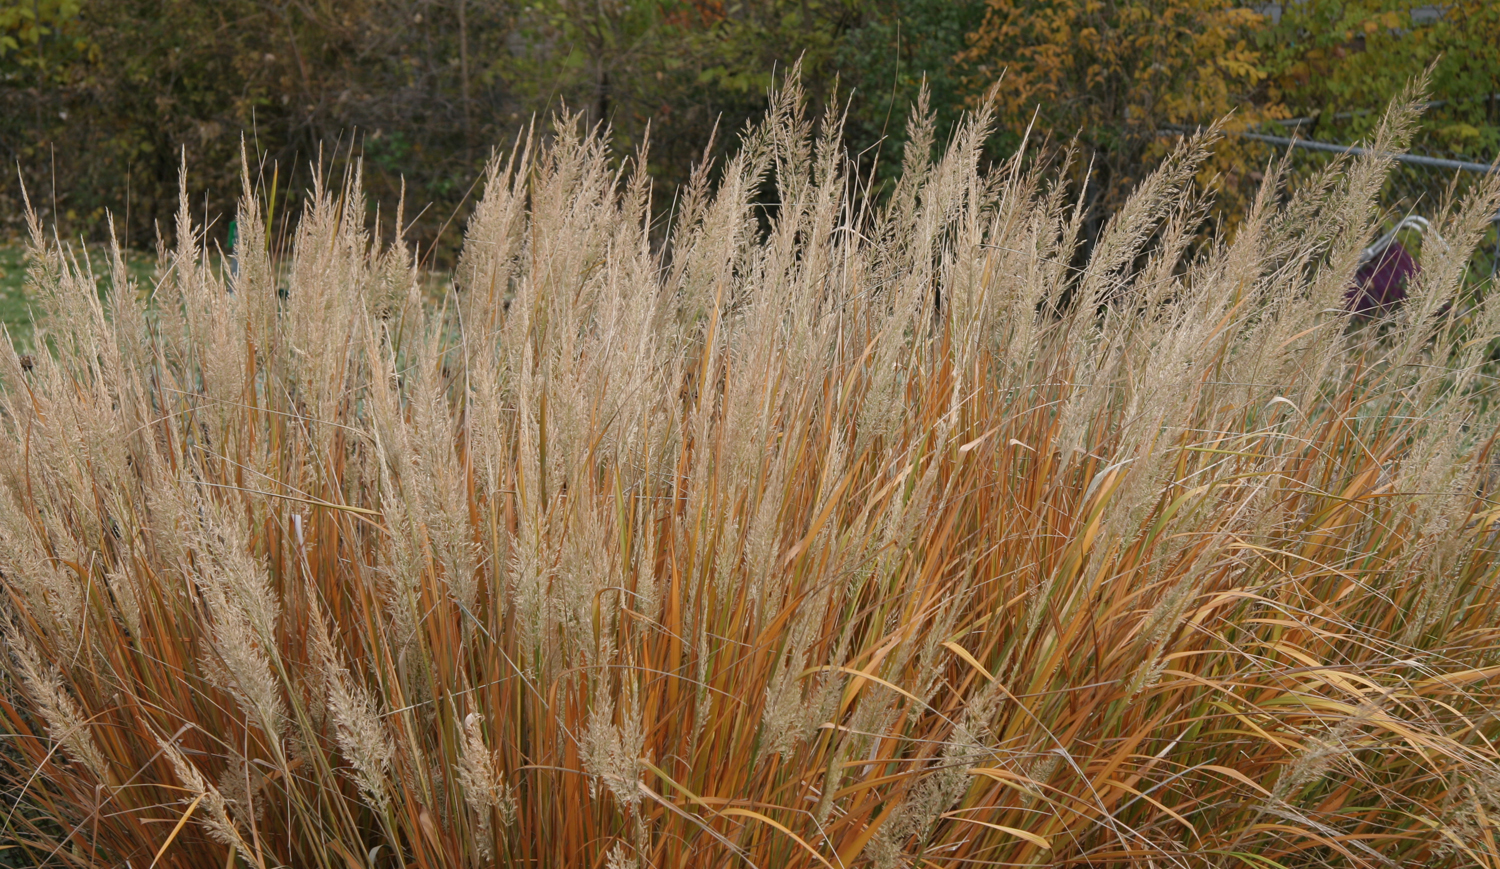 Korean Feather Reed Grass has beautiful fall foliage that persists into winter.